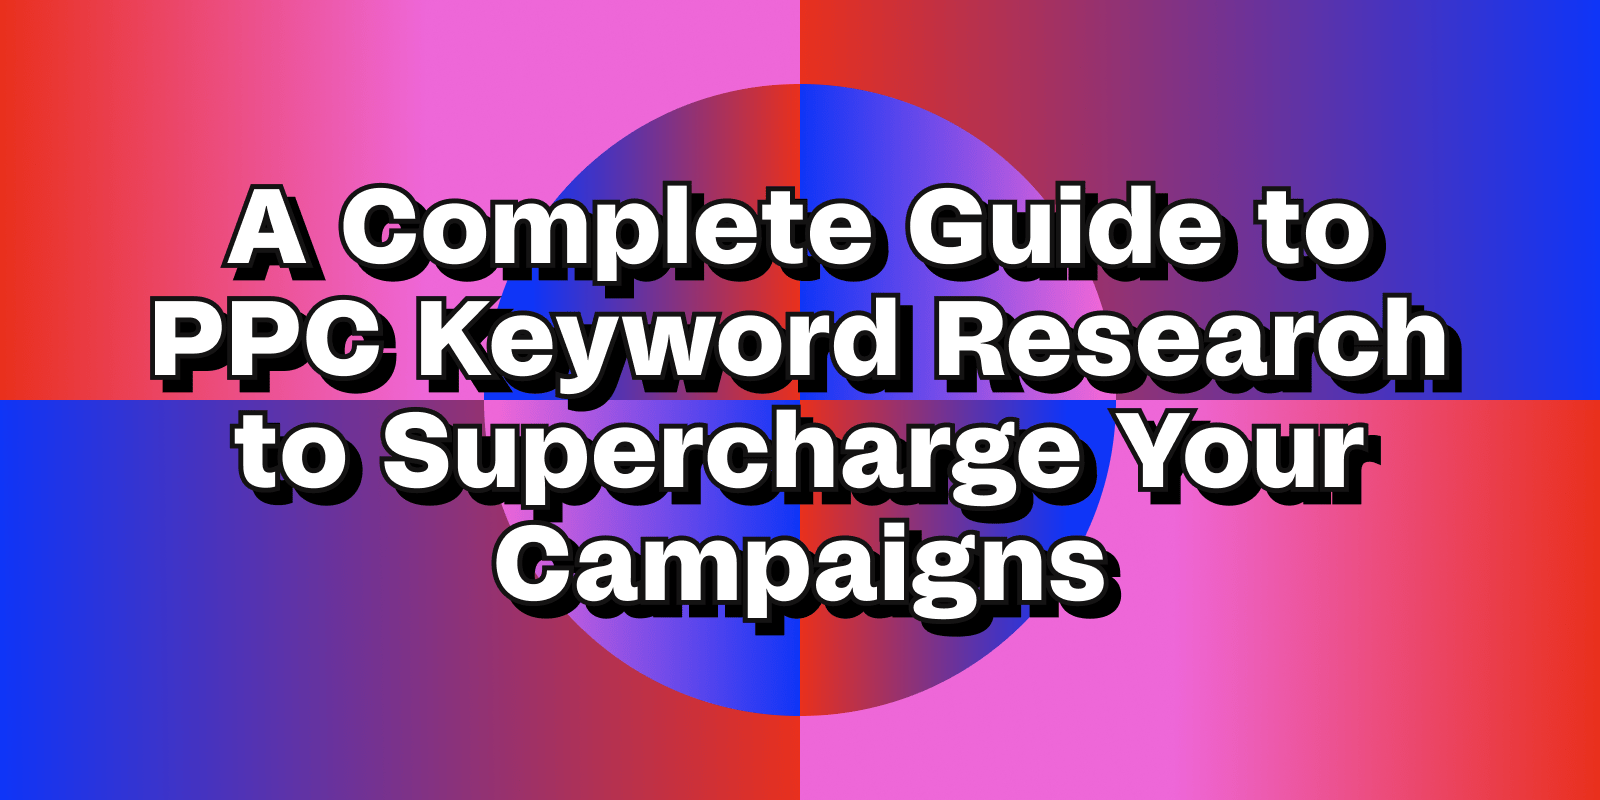 PPC keyword research: A complete guide